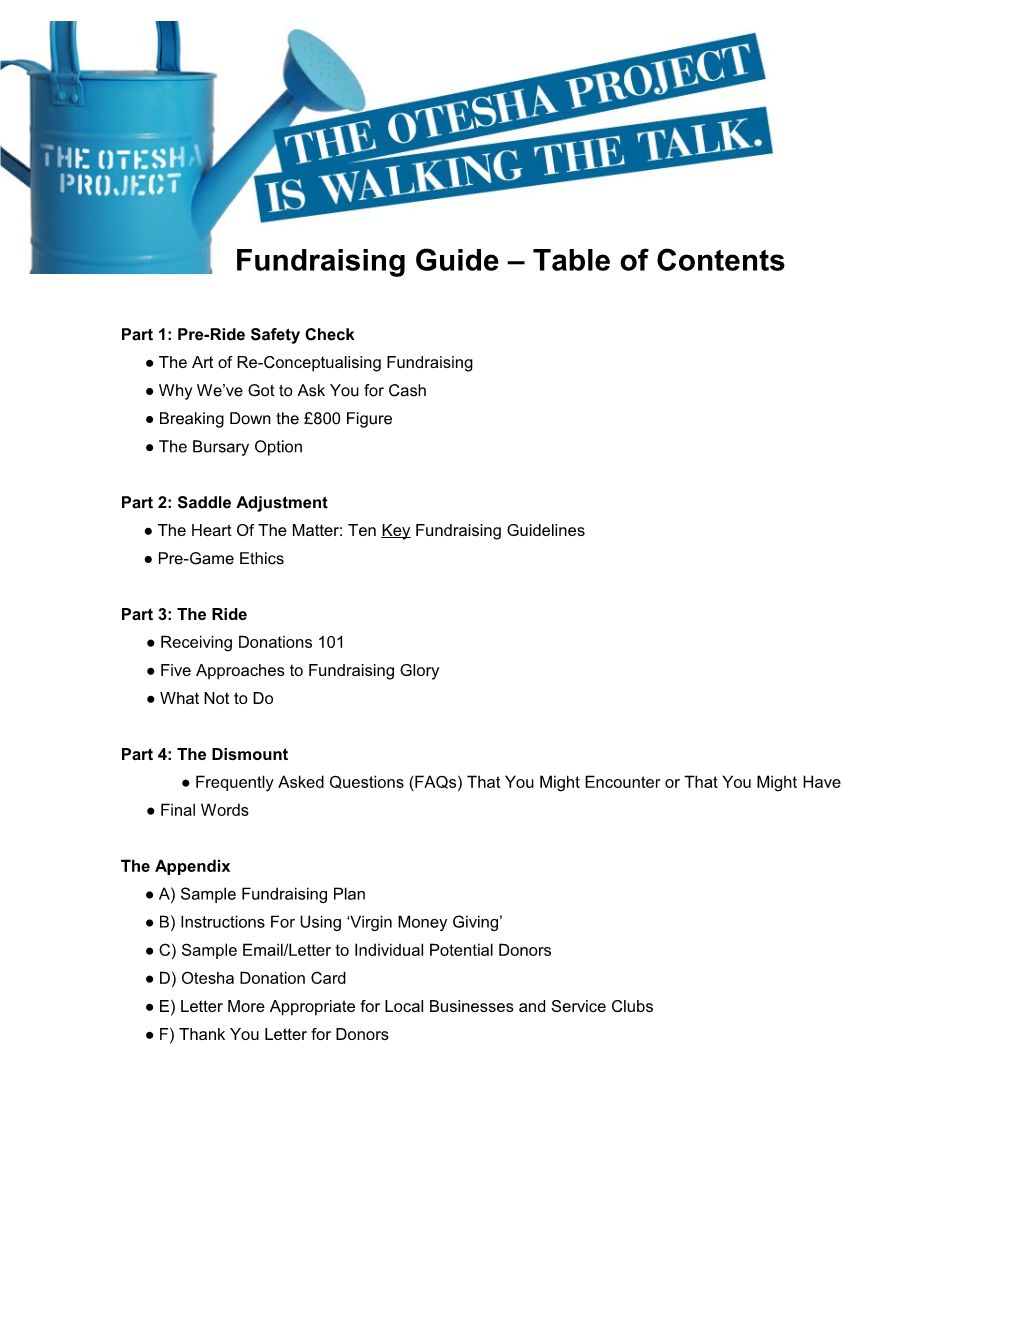 Fundraising Guide Table of Contents